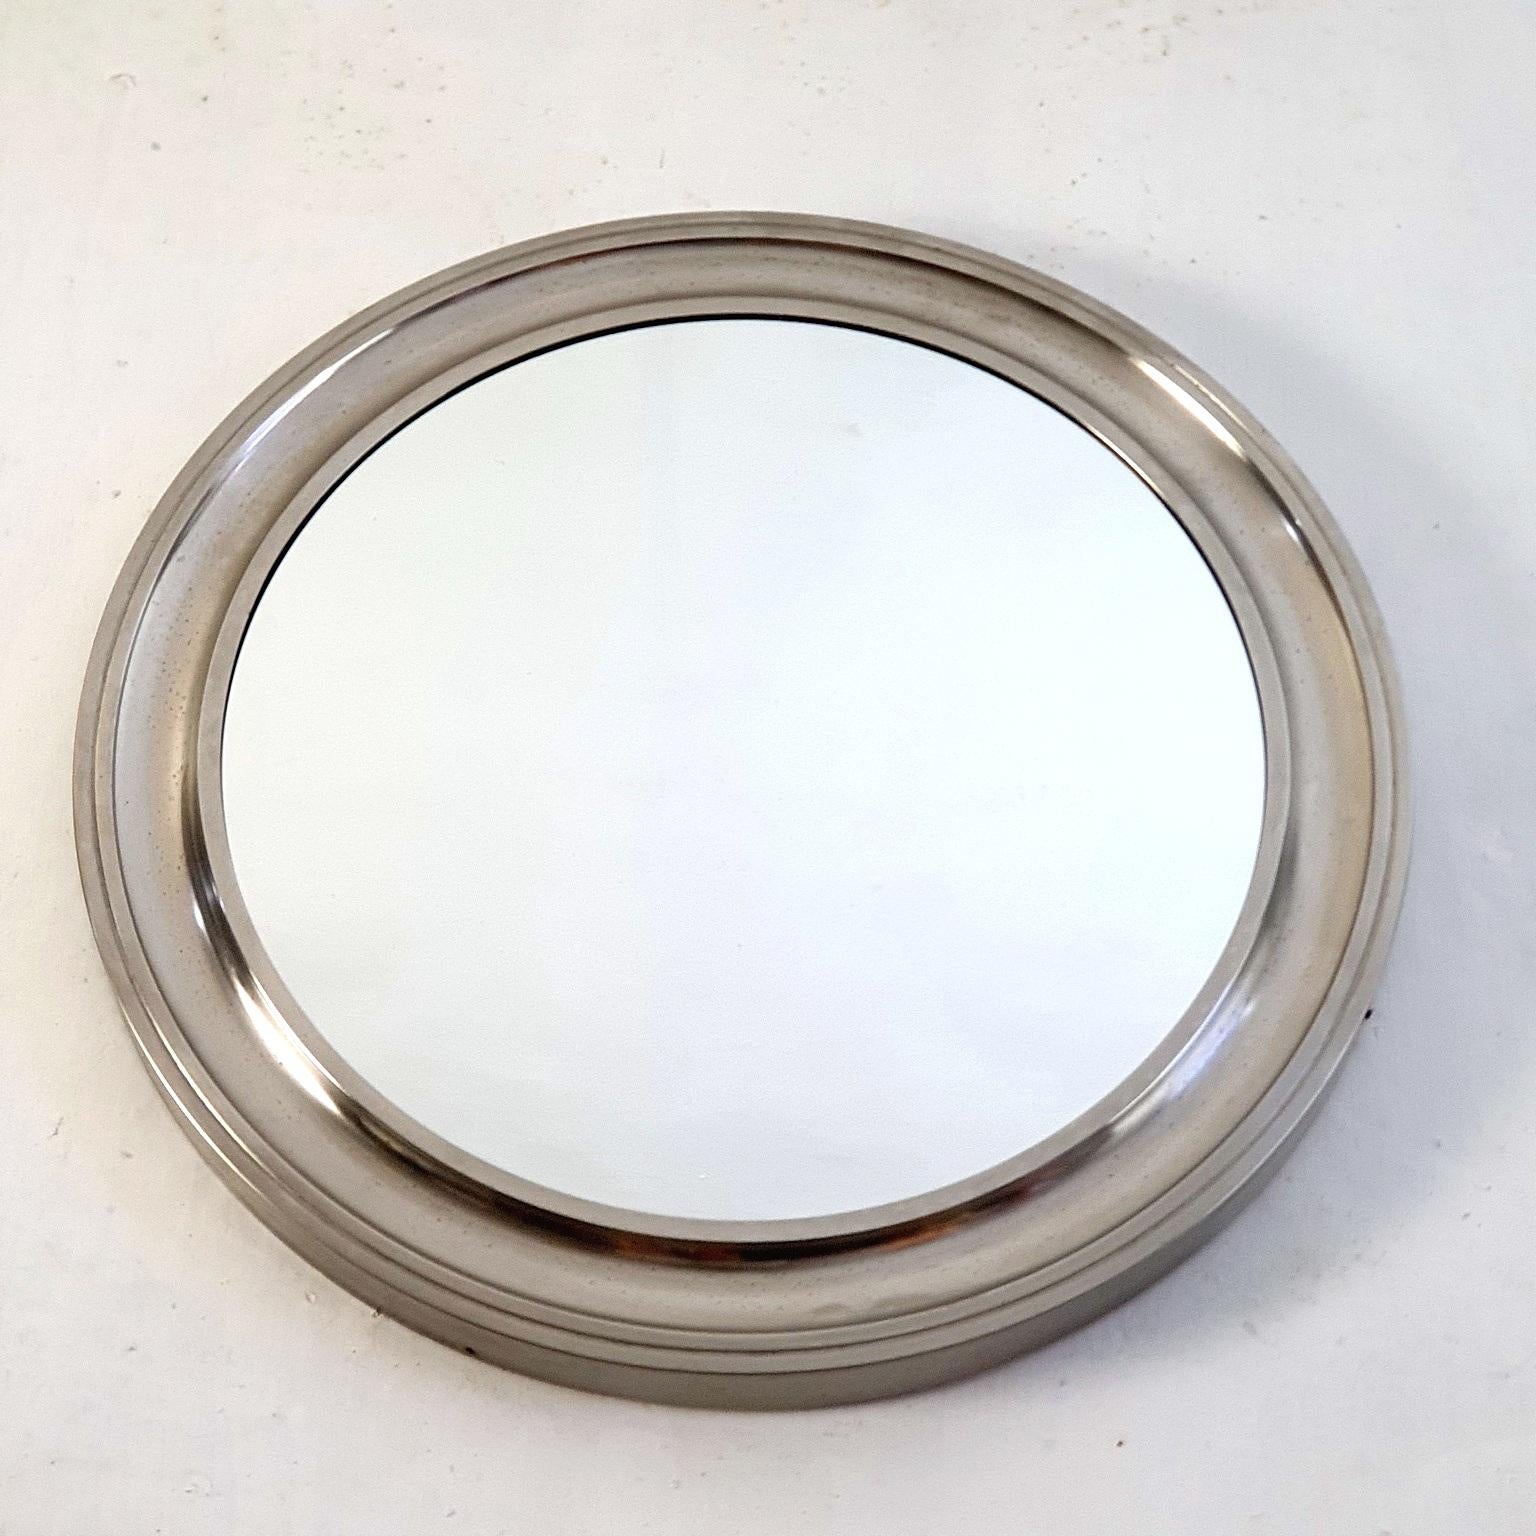 Midcentury large round wall mirror from the 